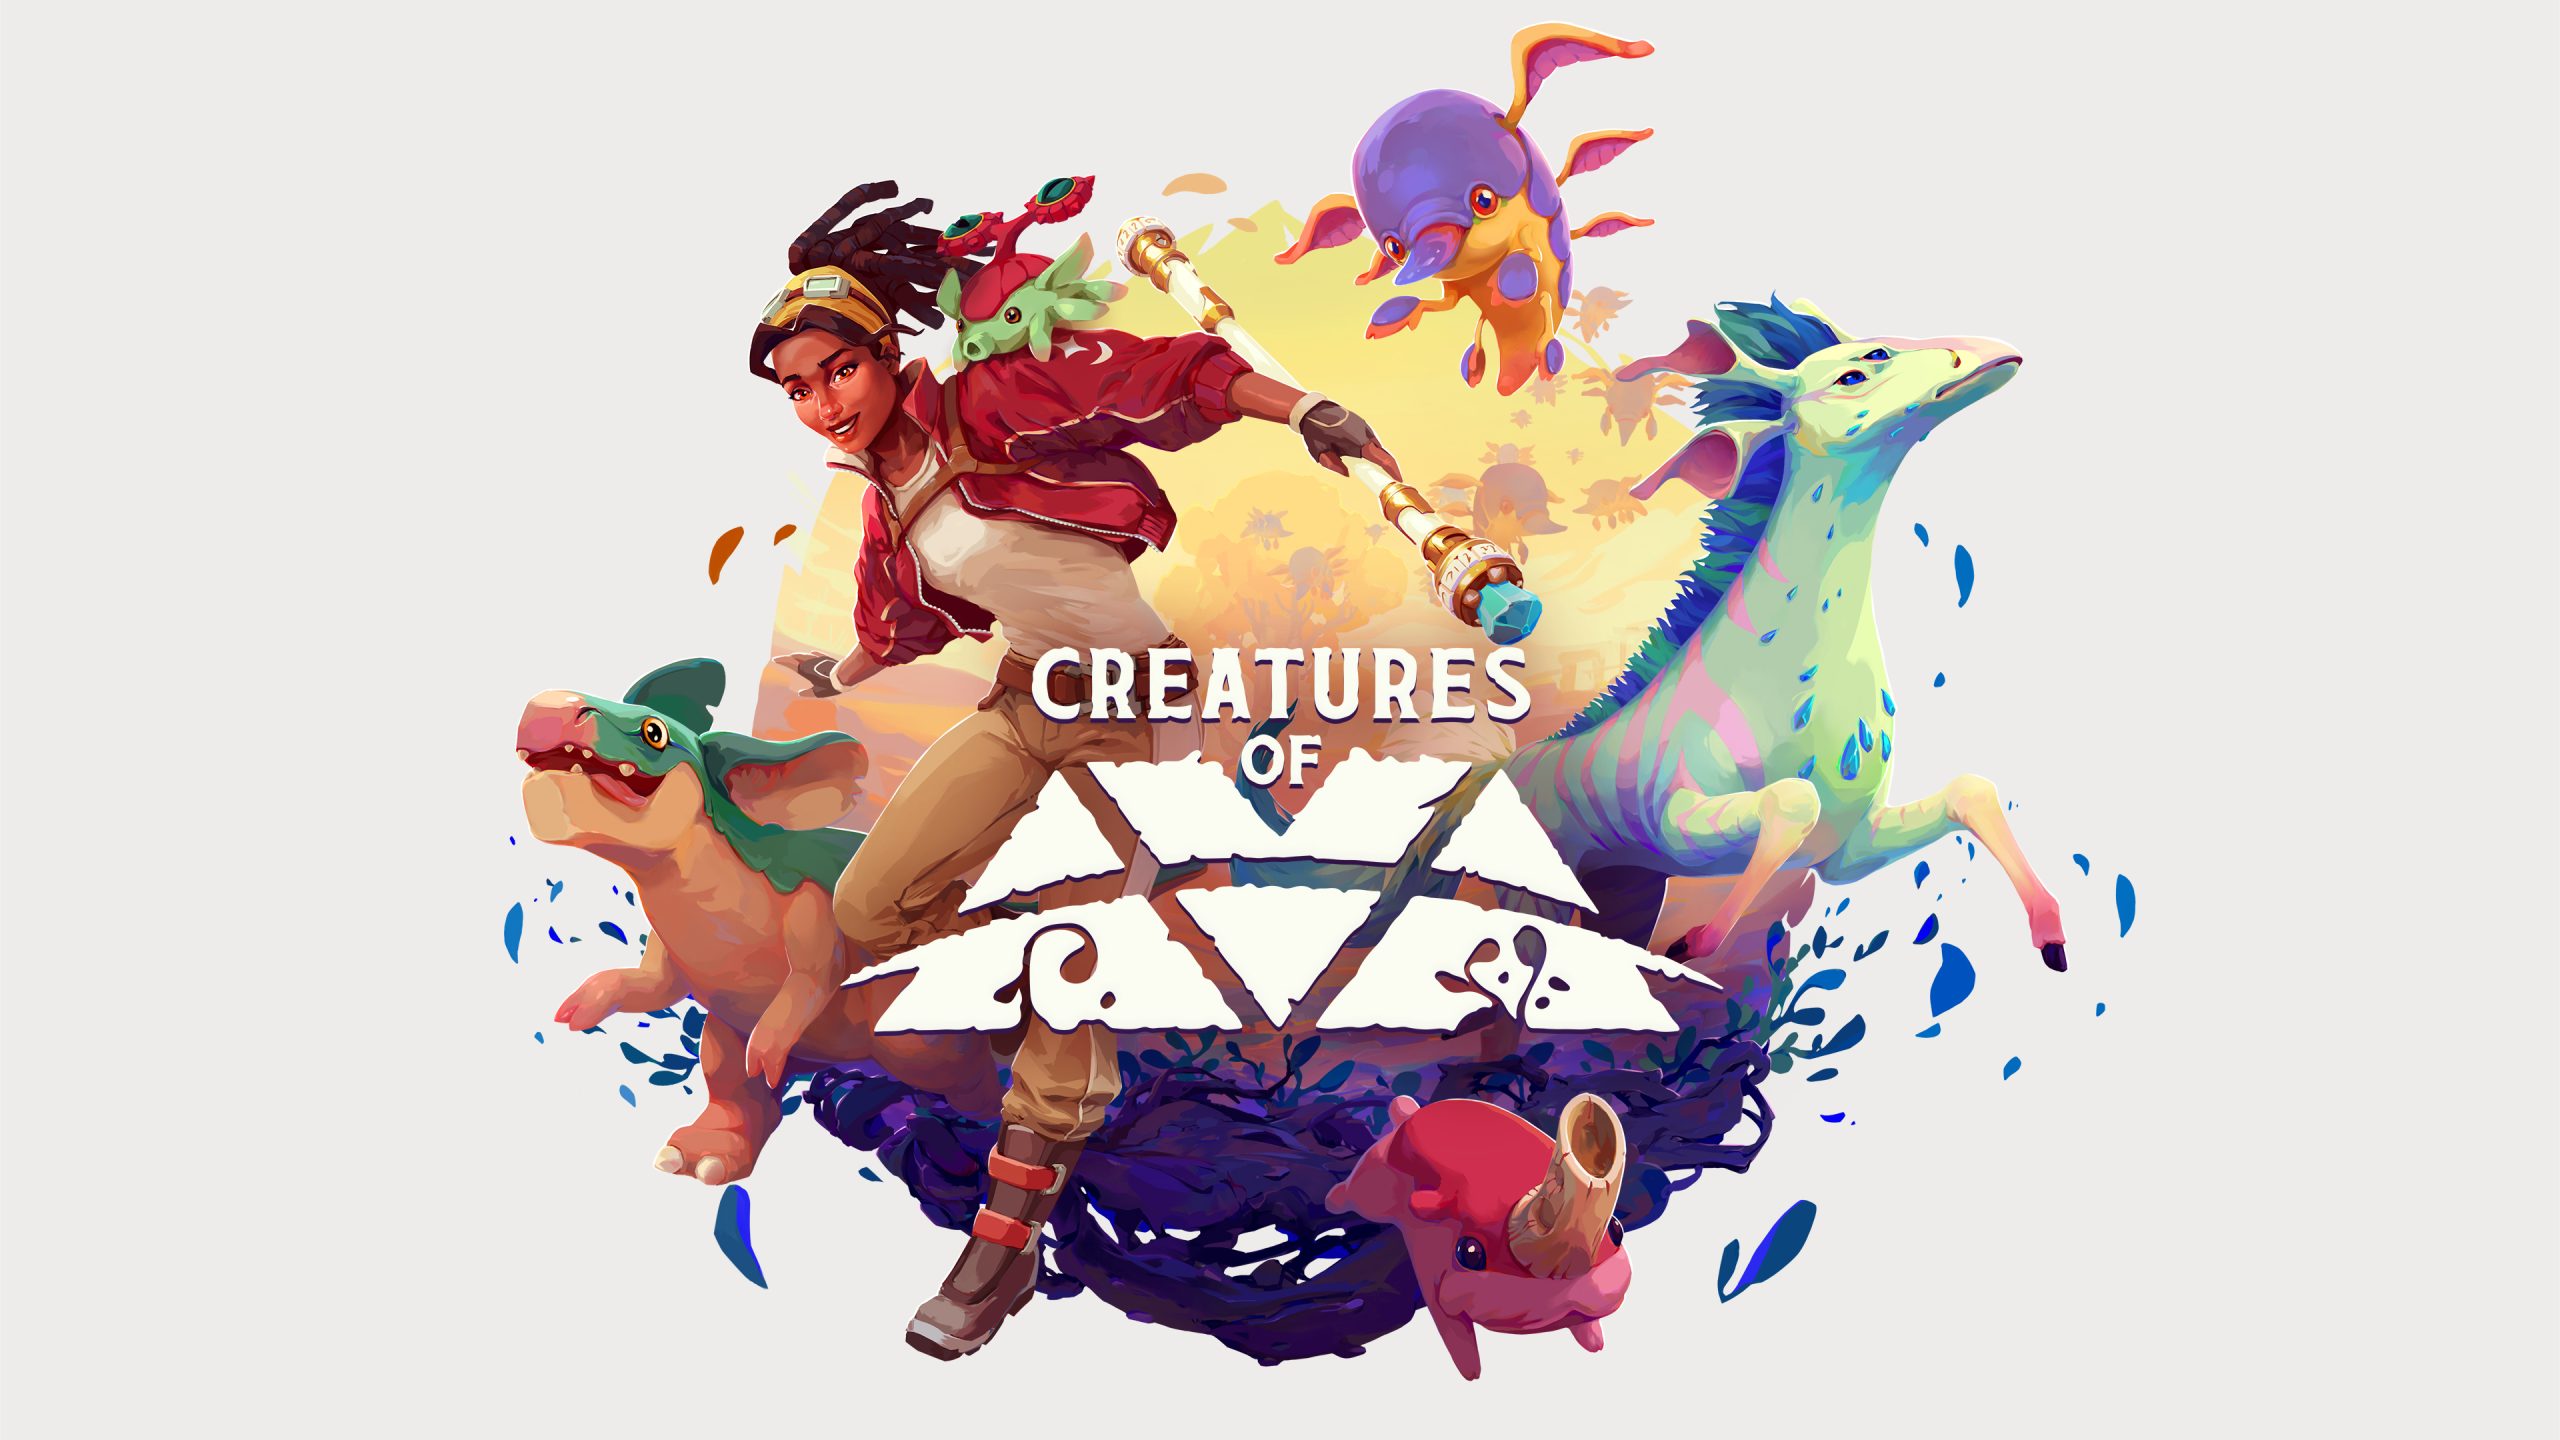 The key art for Creatures of Ava.